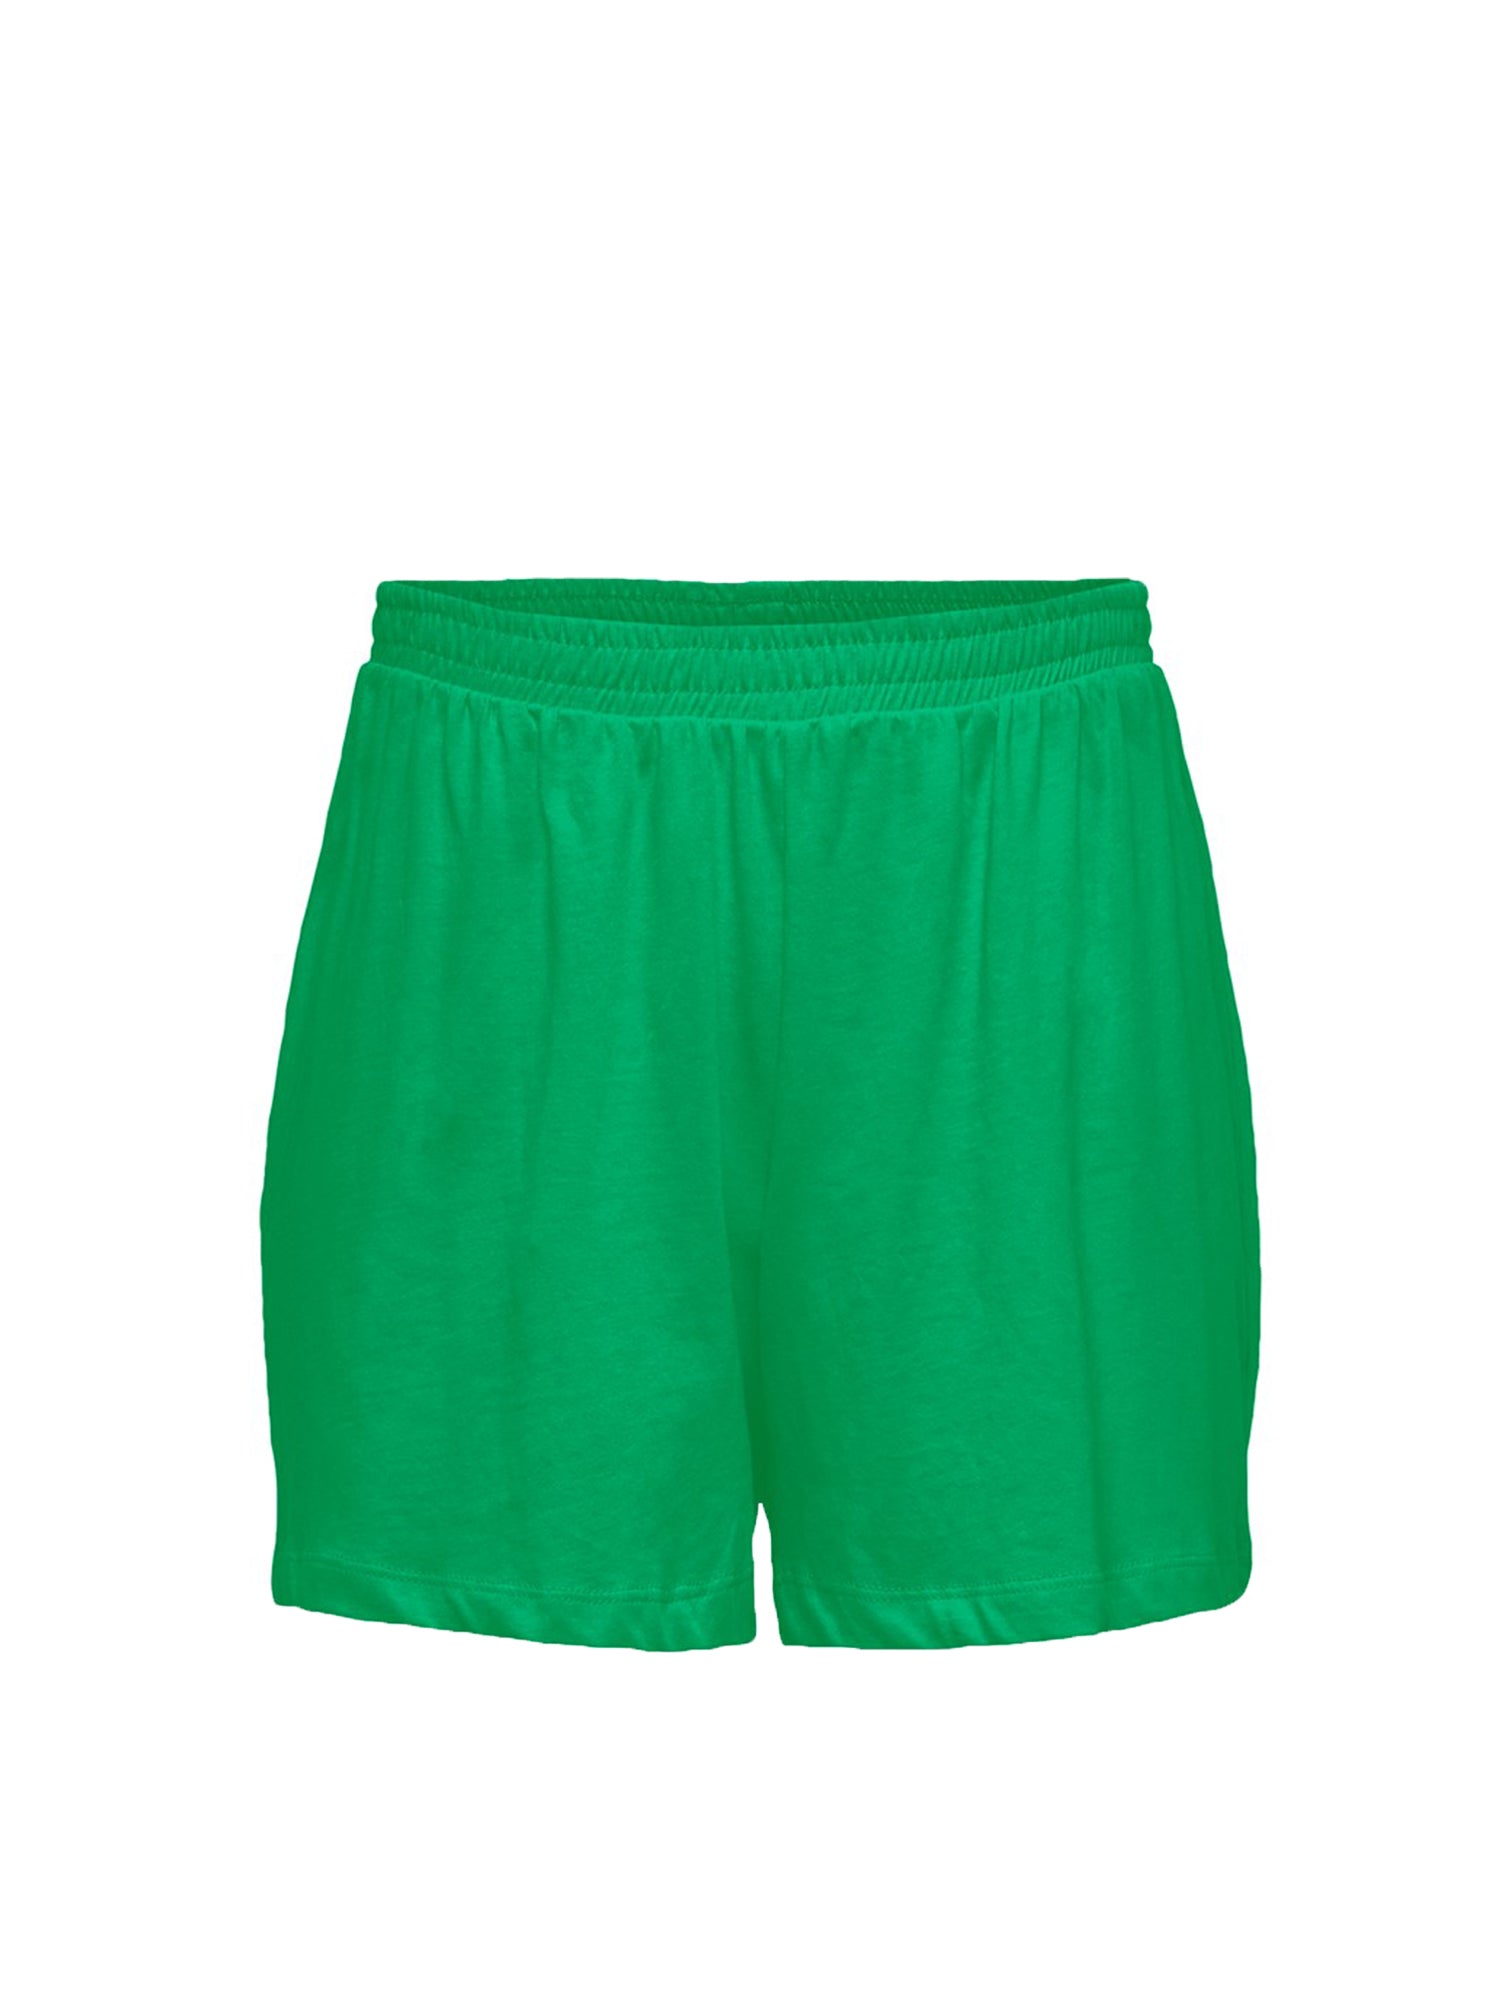 ONLY SHORTS BOX VERDE